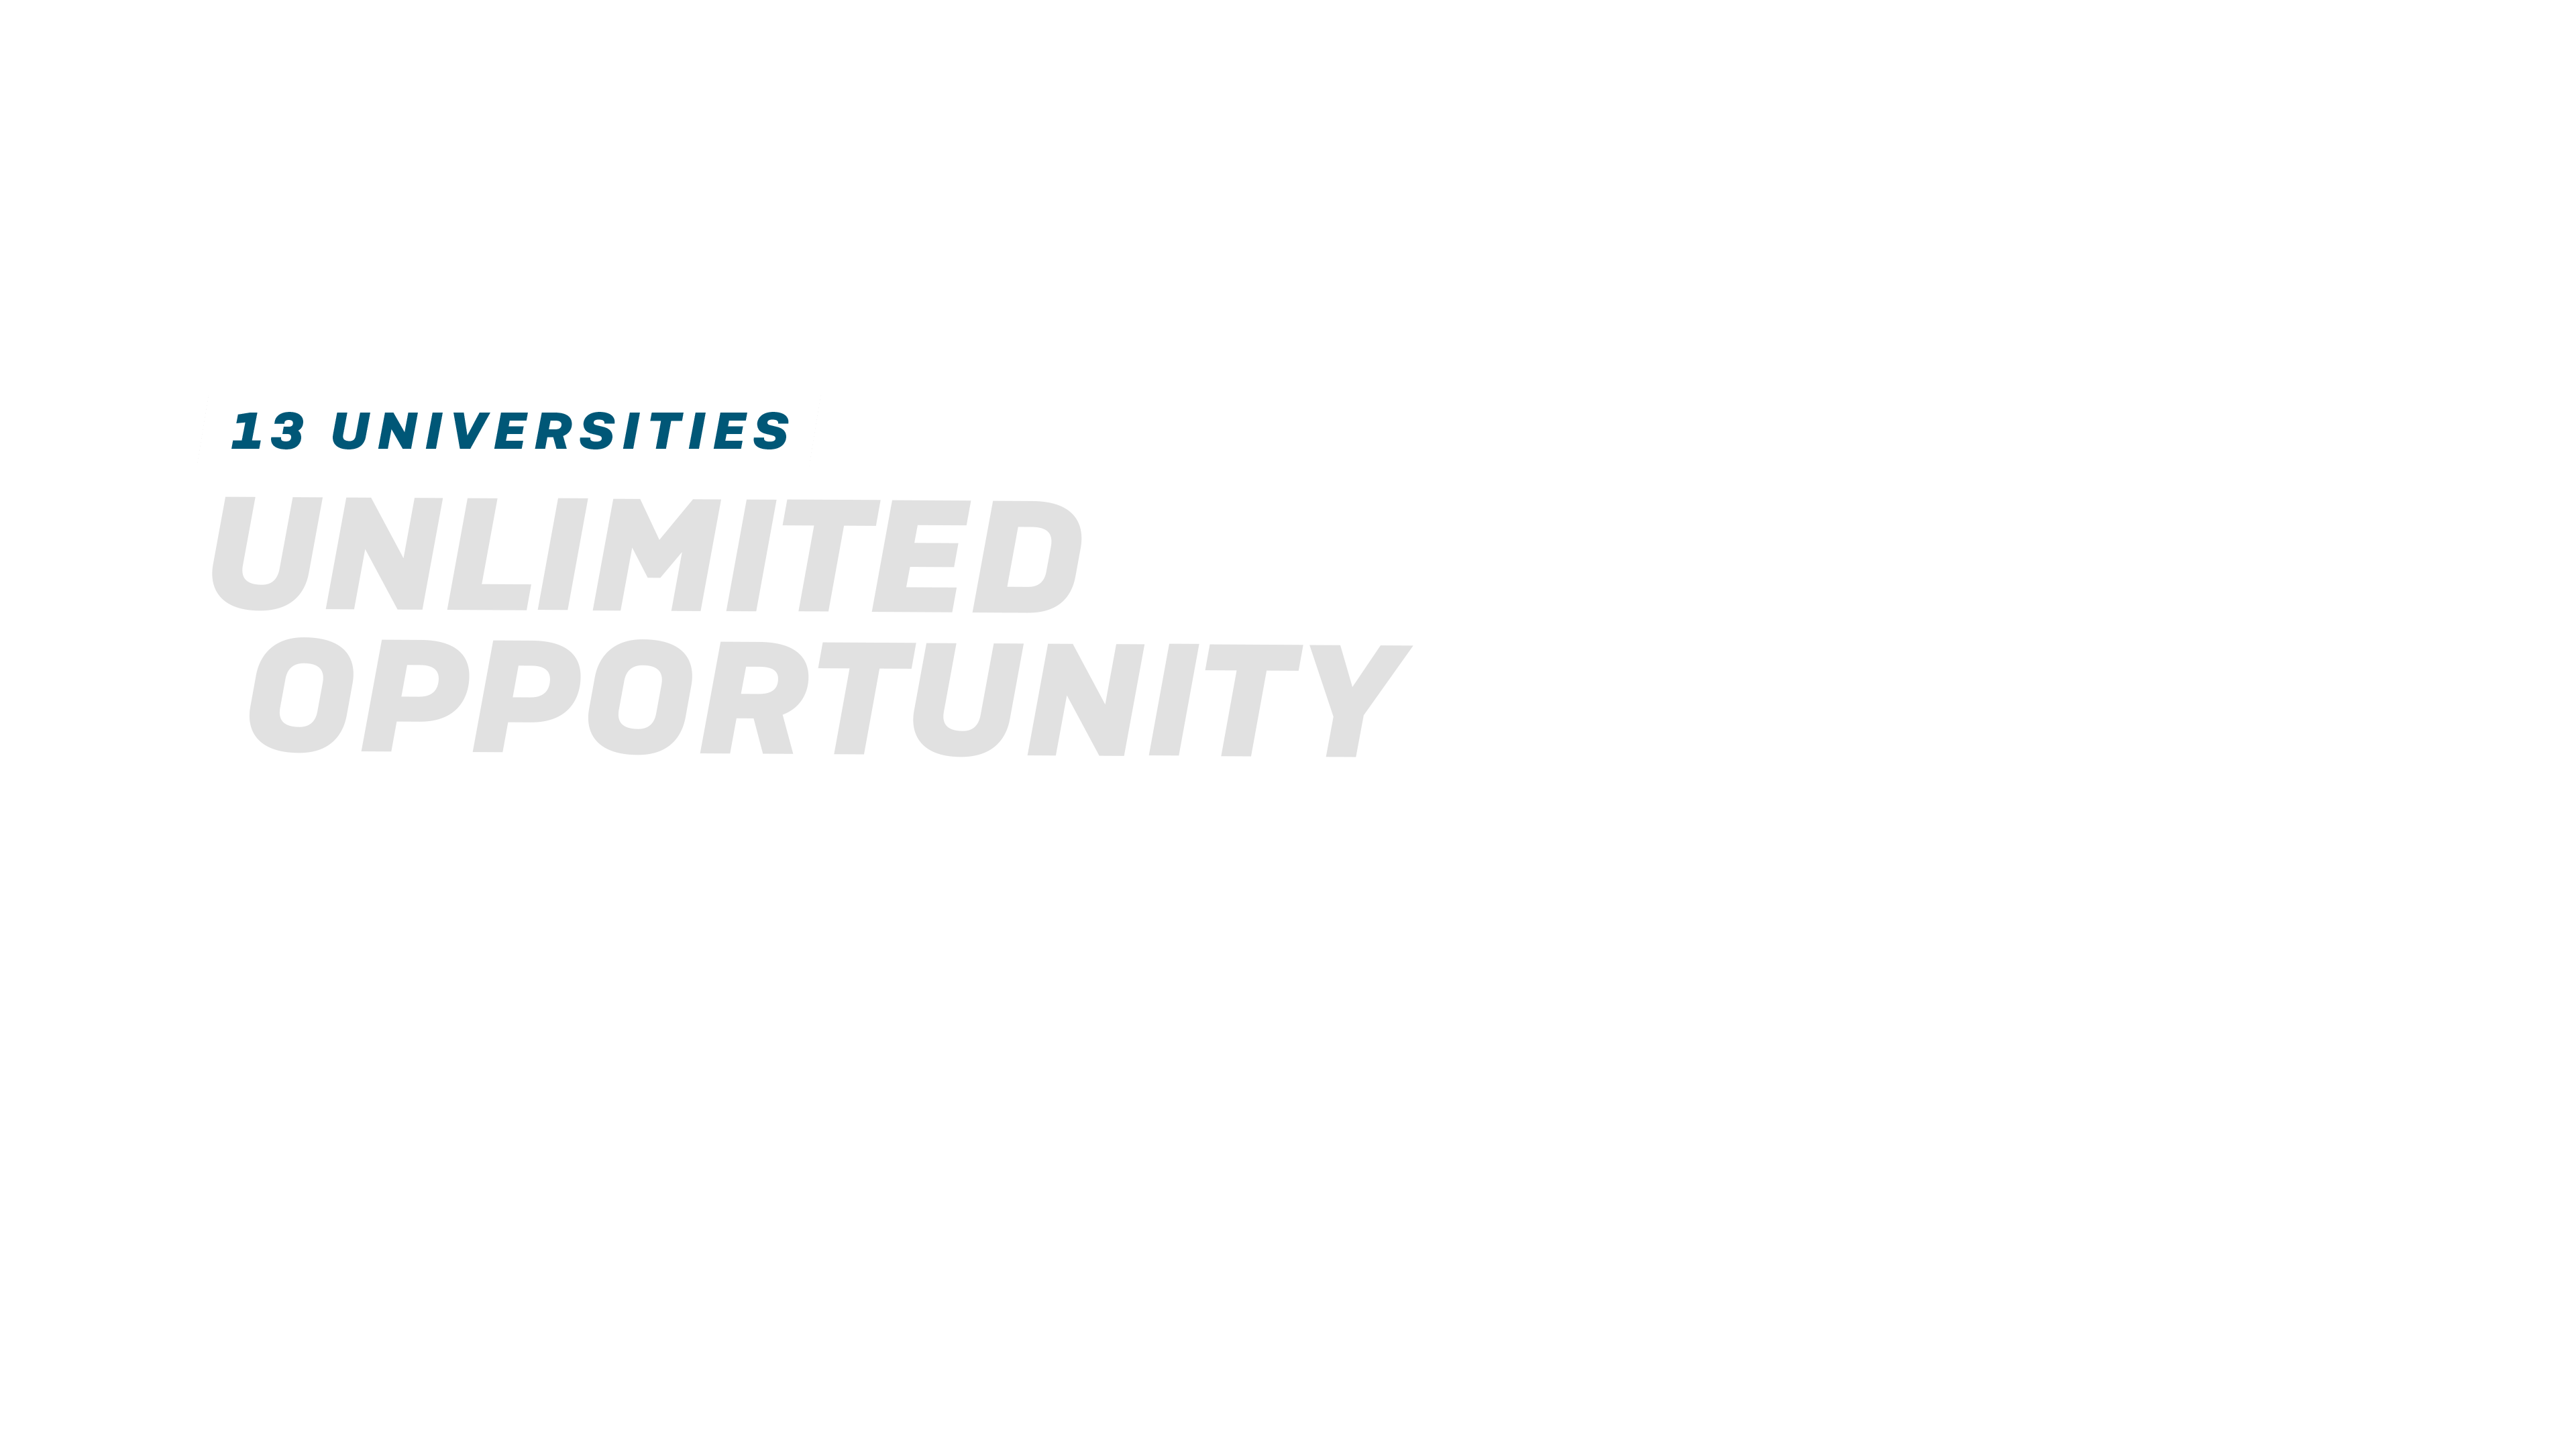 13 Universities - Unlimited Opportunity